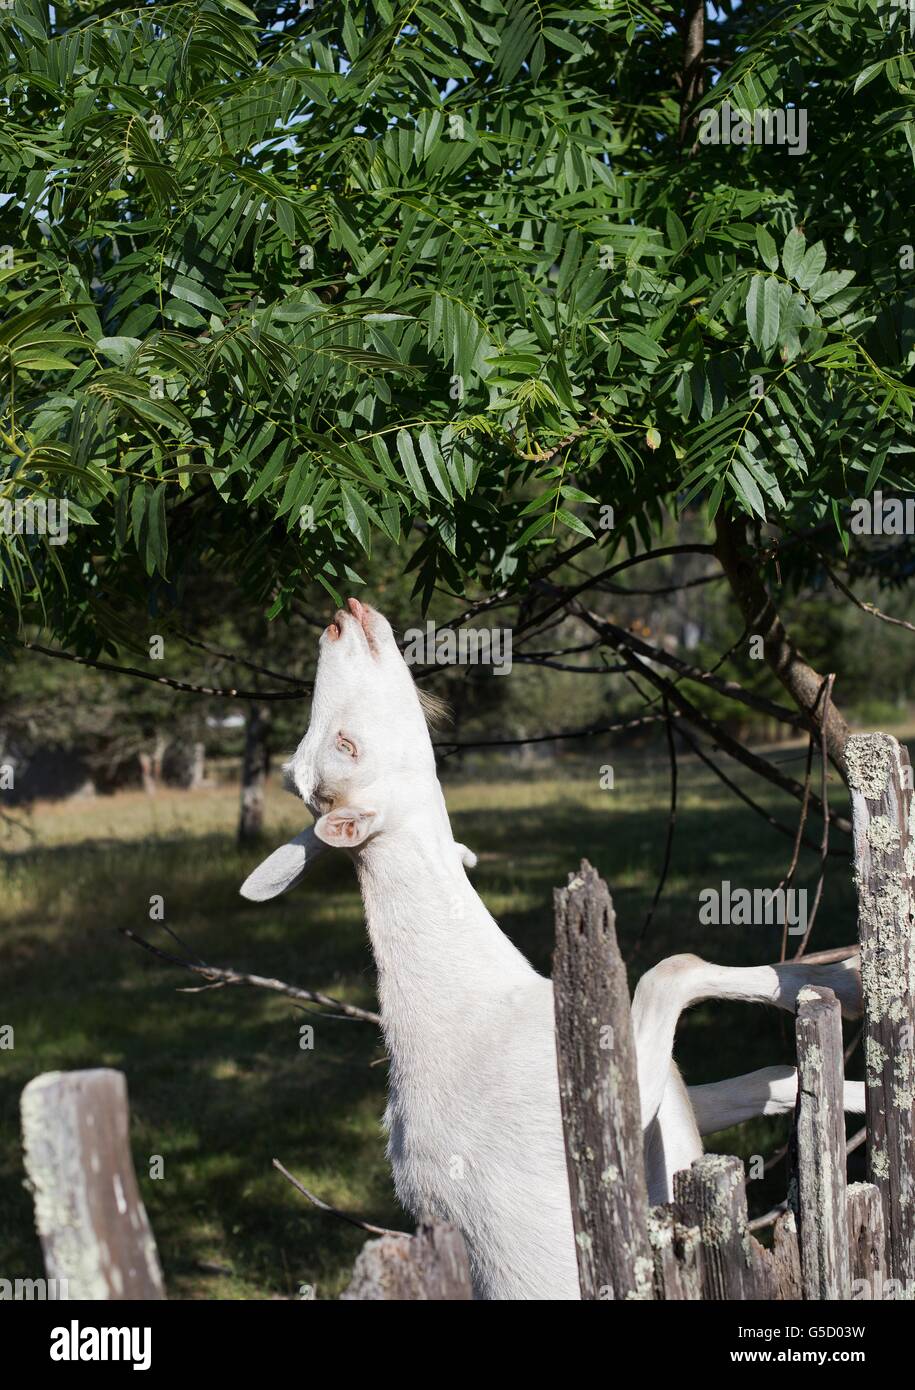 A white goat reaching up into a tree to eat leaves. Stock Photo